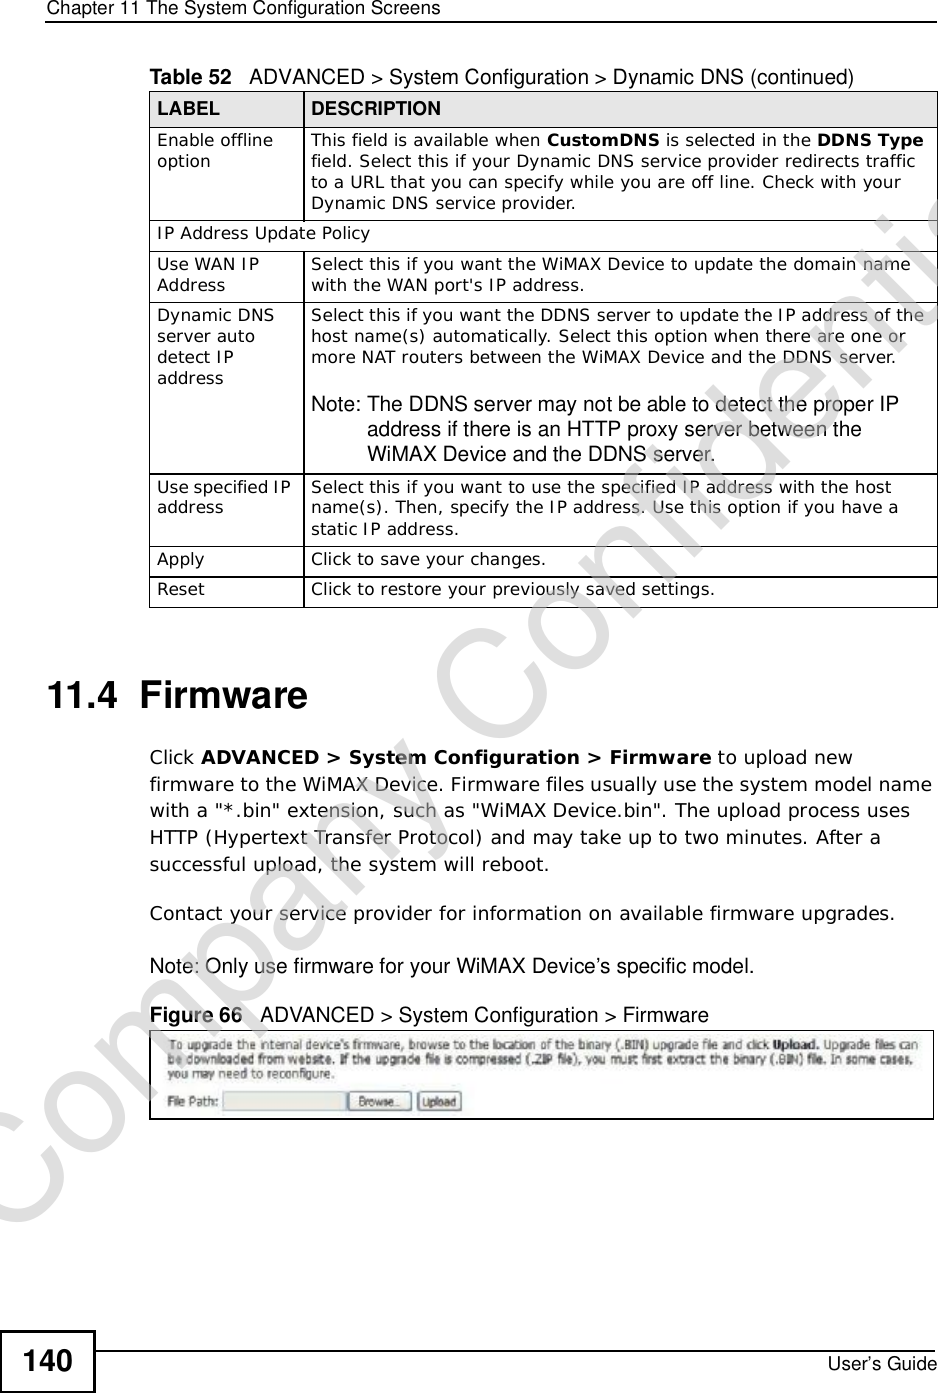 Chapter 11The System Configuration ScreensUser’s Guide14011.4  FirmwareClick ADVANCED &gt; System Configuration &gt; Firmware to upload new firmware to the WiMAX Device. Firmware files usually use the system model name with a &quot;*.bin&quot; extension, such as &quot;WiMAX Device.bin&quot;. The upload process uses HTTP (Hypertext Transfer Protocol) and may take up to two minutes. After a successful upload, the system will reboot. Contact your service provider for information on available firmware upgrades.Note: Only use firmware for your WiMAX Device’s specific model.Figure 66   ADVANCED &gt; System Configuration &gt; FirmwareEnable offline option This field is available when CustomDNS is selected in the DDNS Type field. Select this if your Dynamic DNS service provider redirects traffic to a URL that you can specify while you are off line. Check with your Dynamic DNS service provider.IP Address Update PolicyUse WAN IP Address Select this if you want the WiMAX Device to update the domain name with the WAN port&apos;s IP address.Dynamic DNS server auto detect IP addressSelect this if you want the DDNS server to update the IP address of the host name(s) automatically. Select this optionwhen there are one or more NAT routers between the WiMAX Device and the DDNS server.Note: The DDNS server may not be able to detect the proper IP address if there is an HTTP proxy server between the WiMAX Device and the DDNS server.Use specified IP address Select this if you want to use the specified IP address with the host name(s). Then, specify the IP address. Use this option if you have a static IP address.ApplyClick to save your changes.ResetClick to restore your previously saved settings.Table 52   ADVANCED &gt; System Configuration &gt; Dynamic DNS (continued)LABEL DESCRIPTIONCompany Confidential